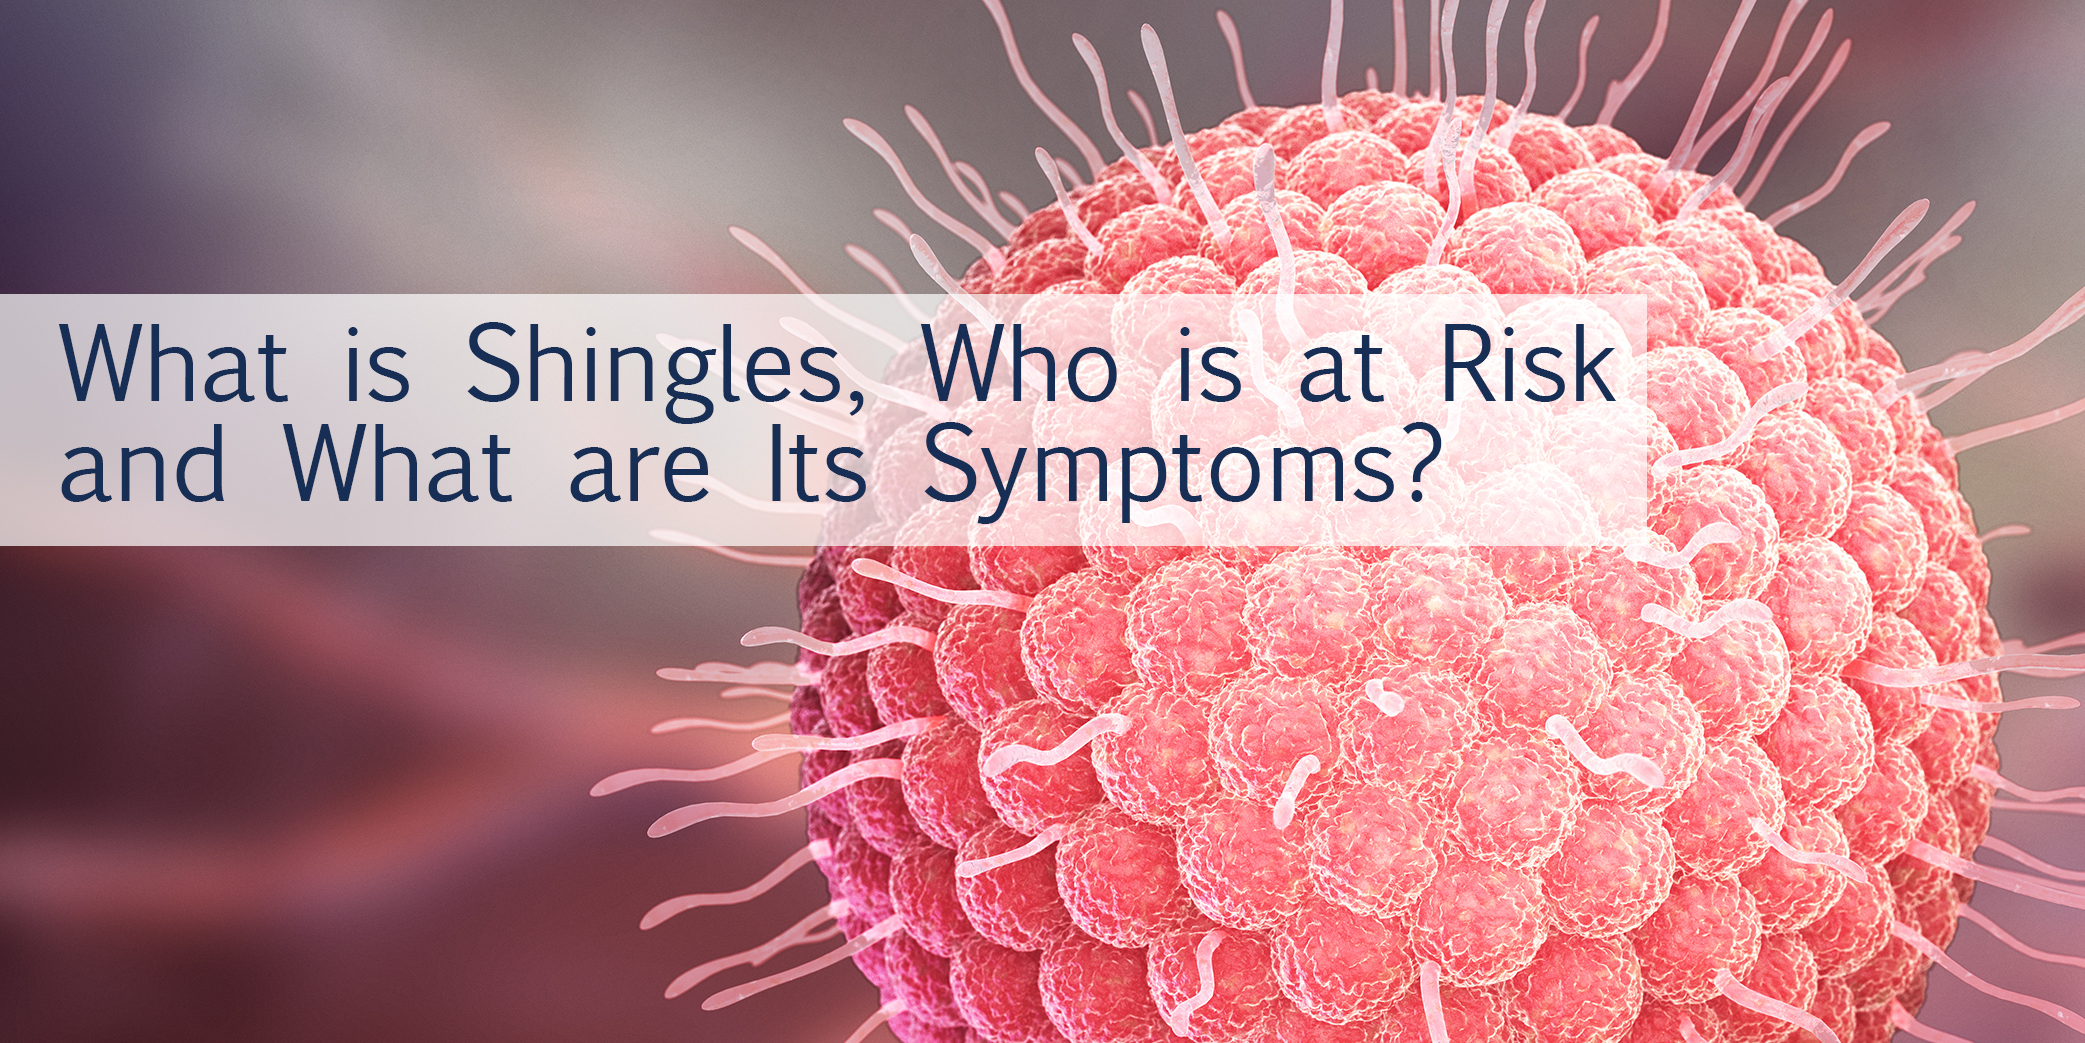 What is shingles, who is at risk and what are its symptoms?